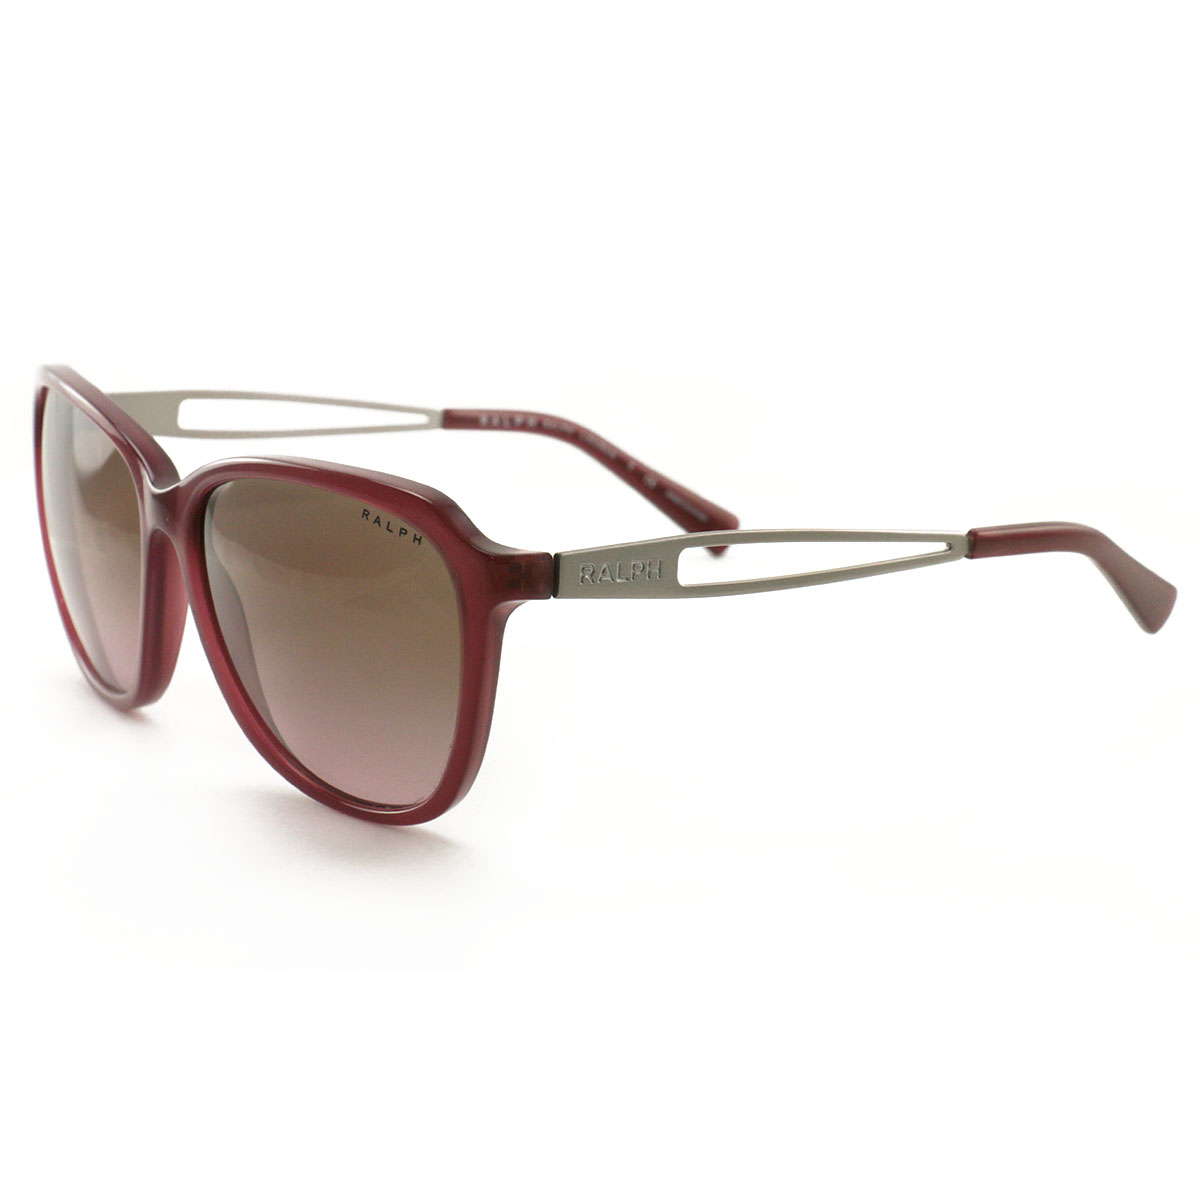 Polo Womens Sunglasses RA5199 1453/14 Berry 57 15 135 without case | eBay